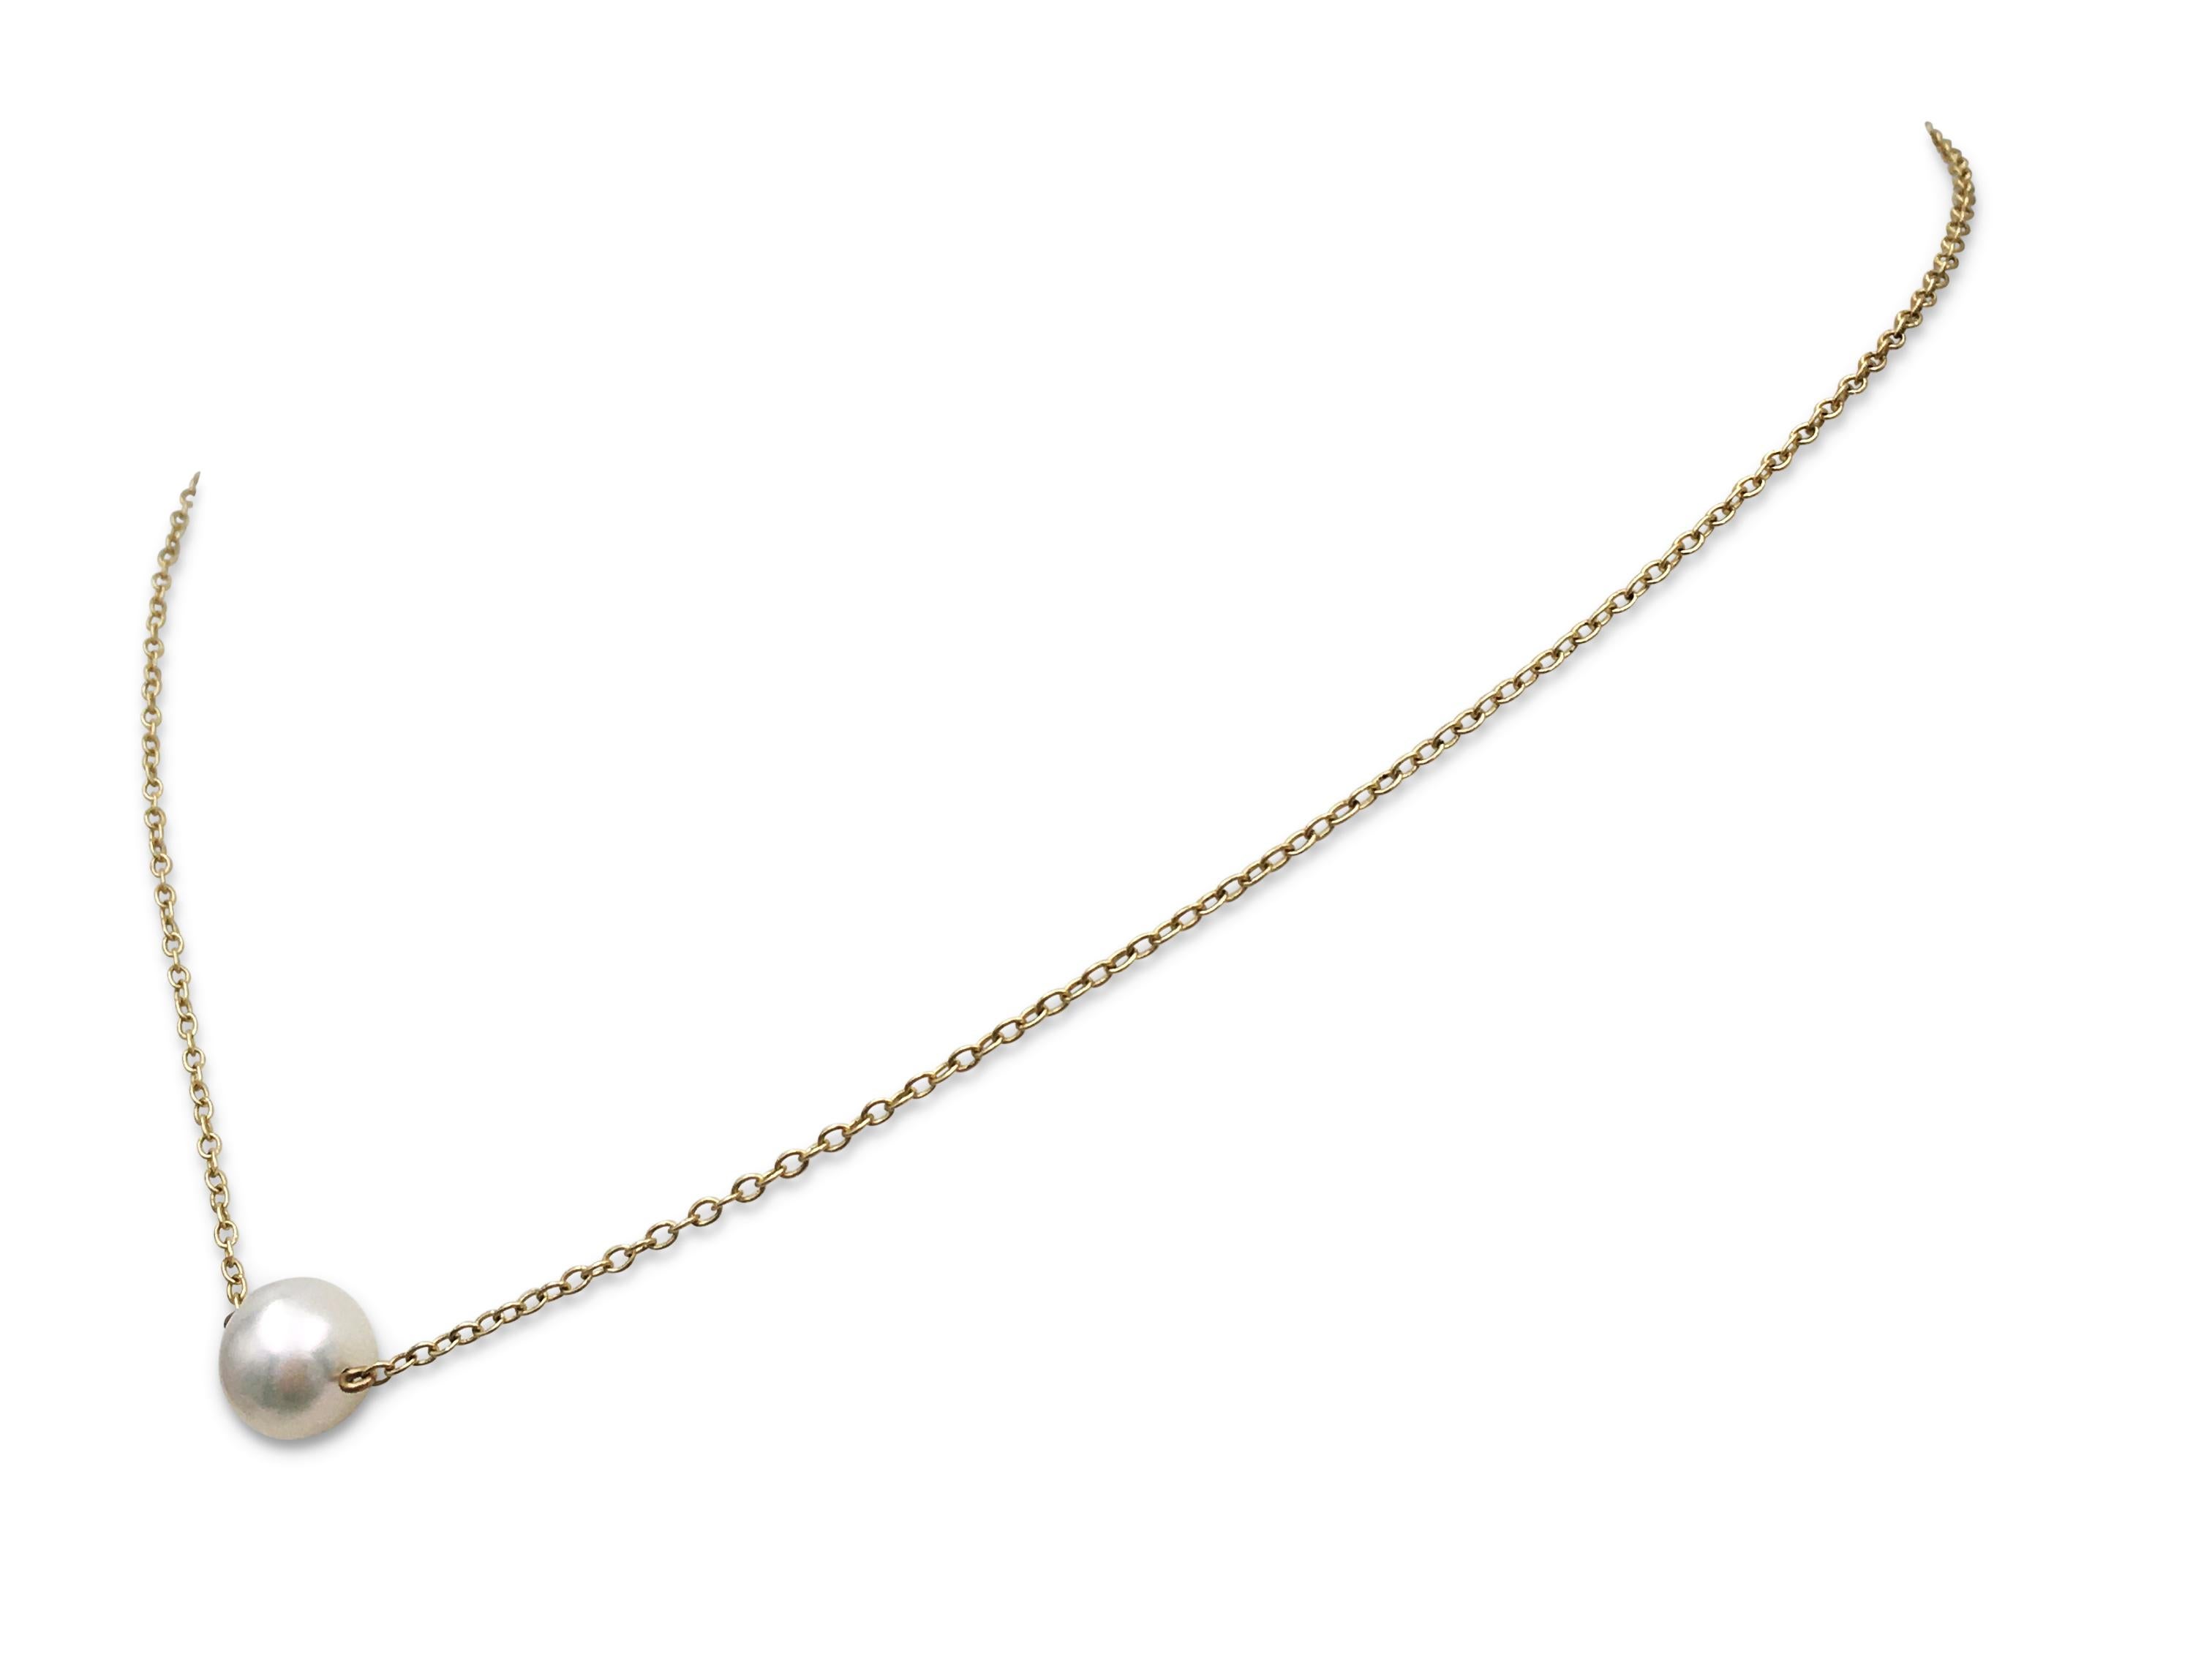 Authentic Mikimoto necklace crafted in 14 karat yellow gold and featuring a single Akoya cultured pearl measuring 7.7mm. Signed M, K14. The necklace presented with the original pouch, no box or papers. CIRCA 2000s. 